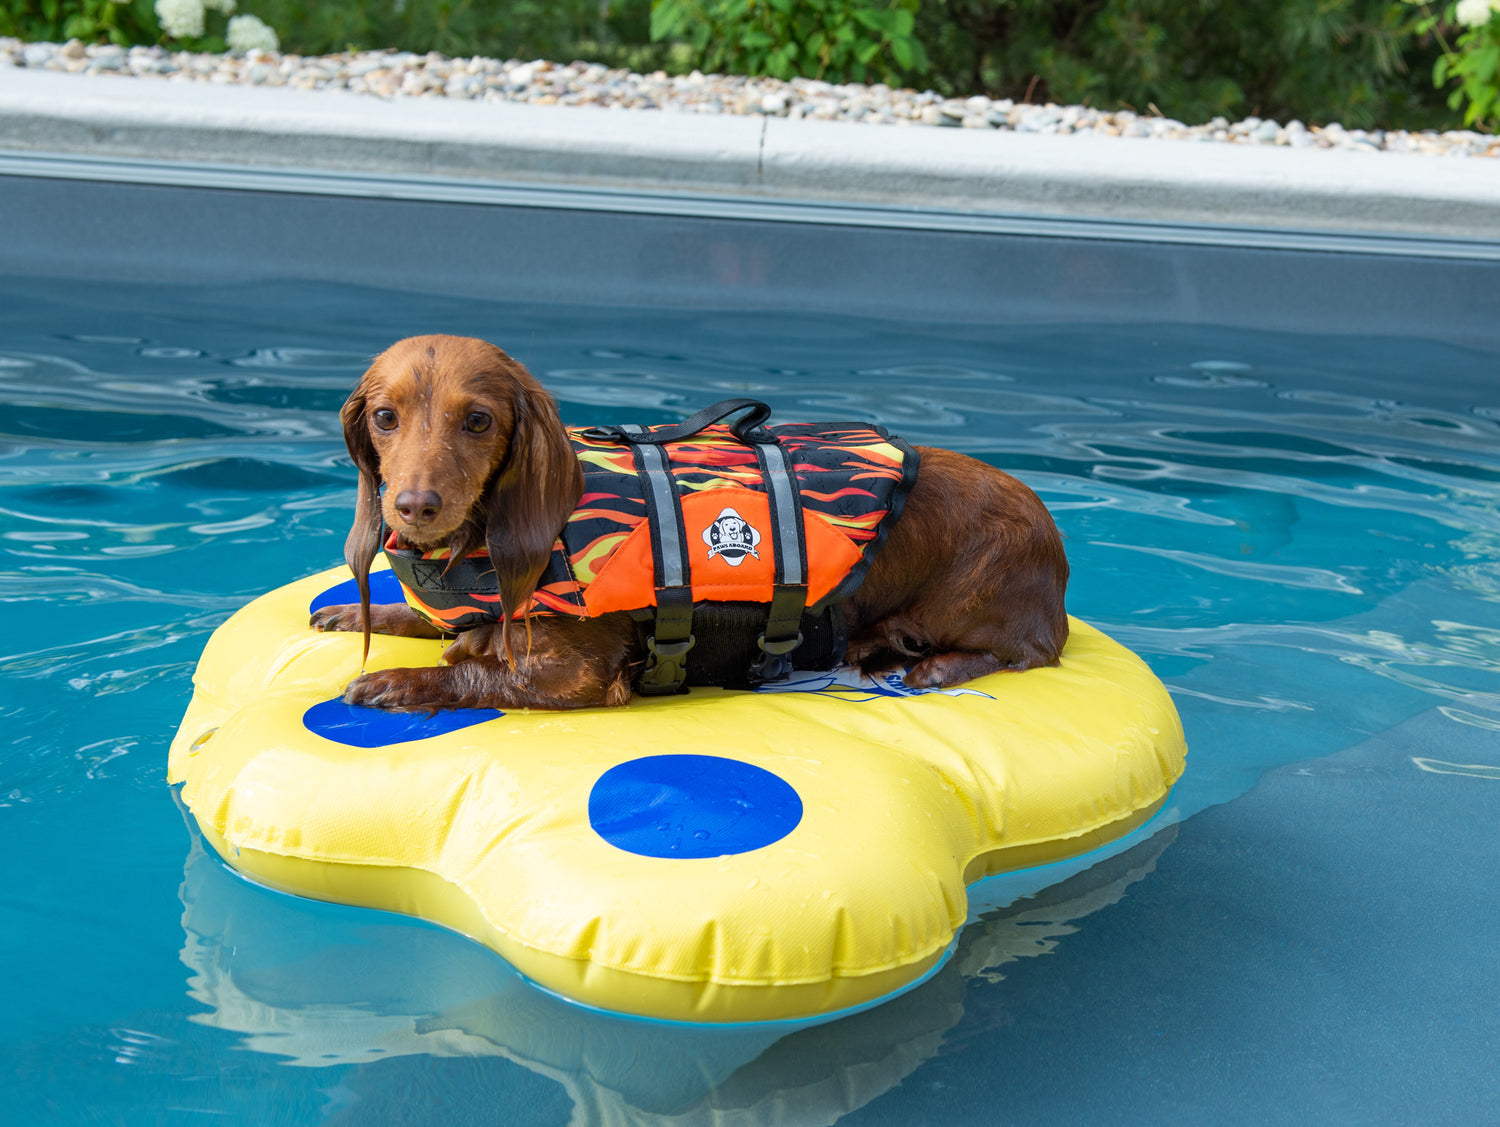 Wet long haired dachshund wearing a racing flames dog life jacket resting on a yellow and blue paw-shaped dog float in a blue in-ground swimming pool.